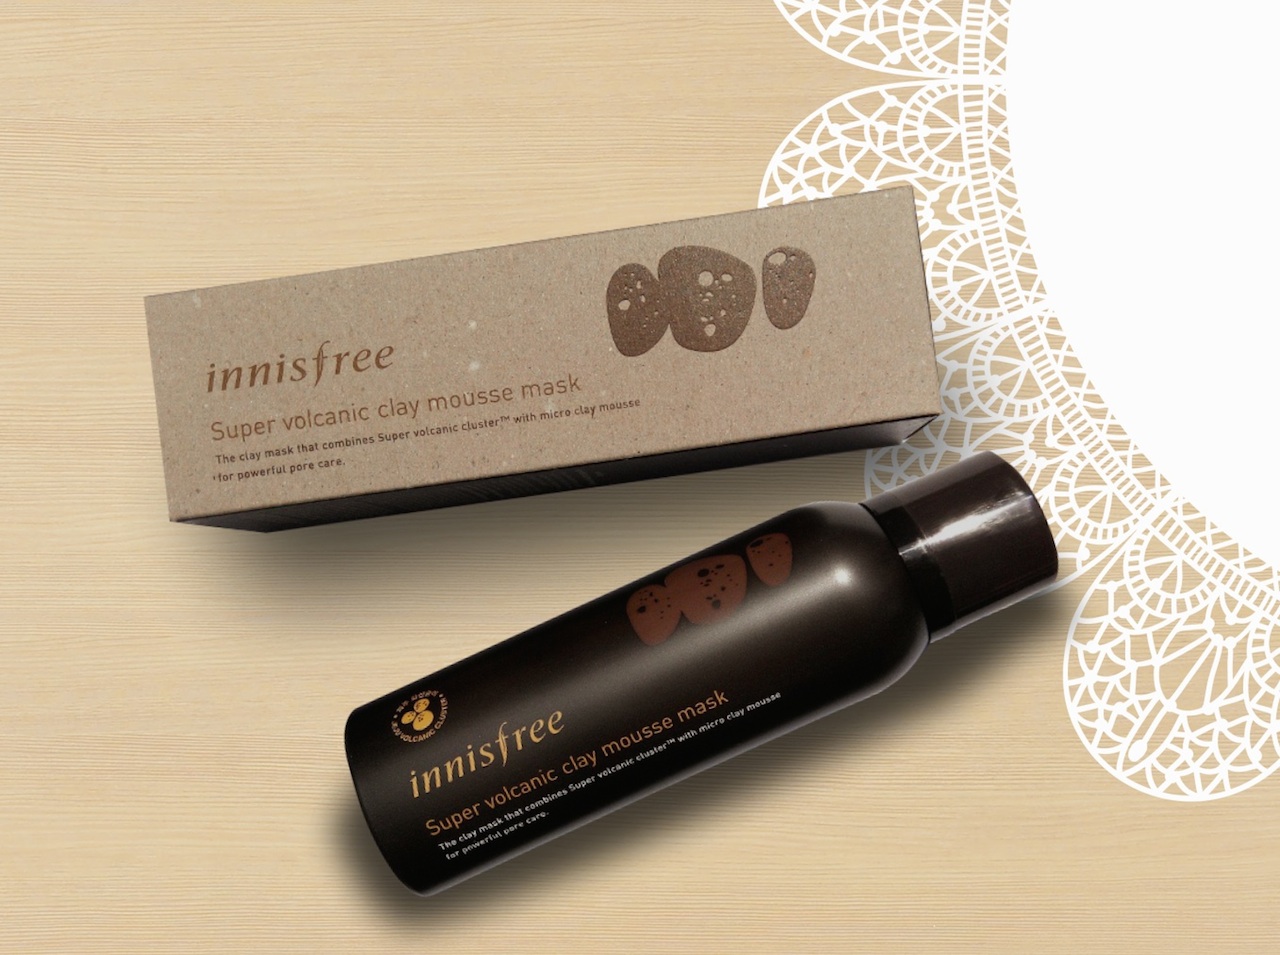 Innisfree-Super-Volcanic-Clay-Mousse-Mask-Review-Pamper.My-v2